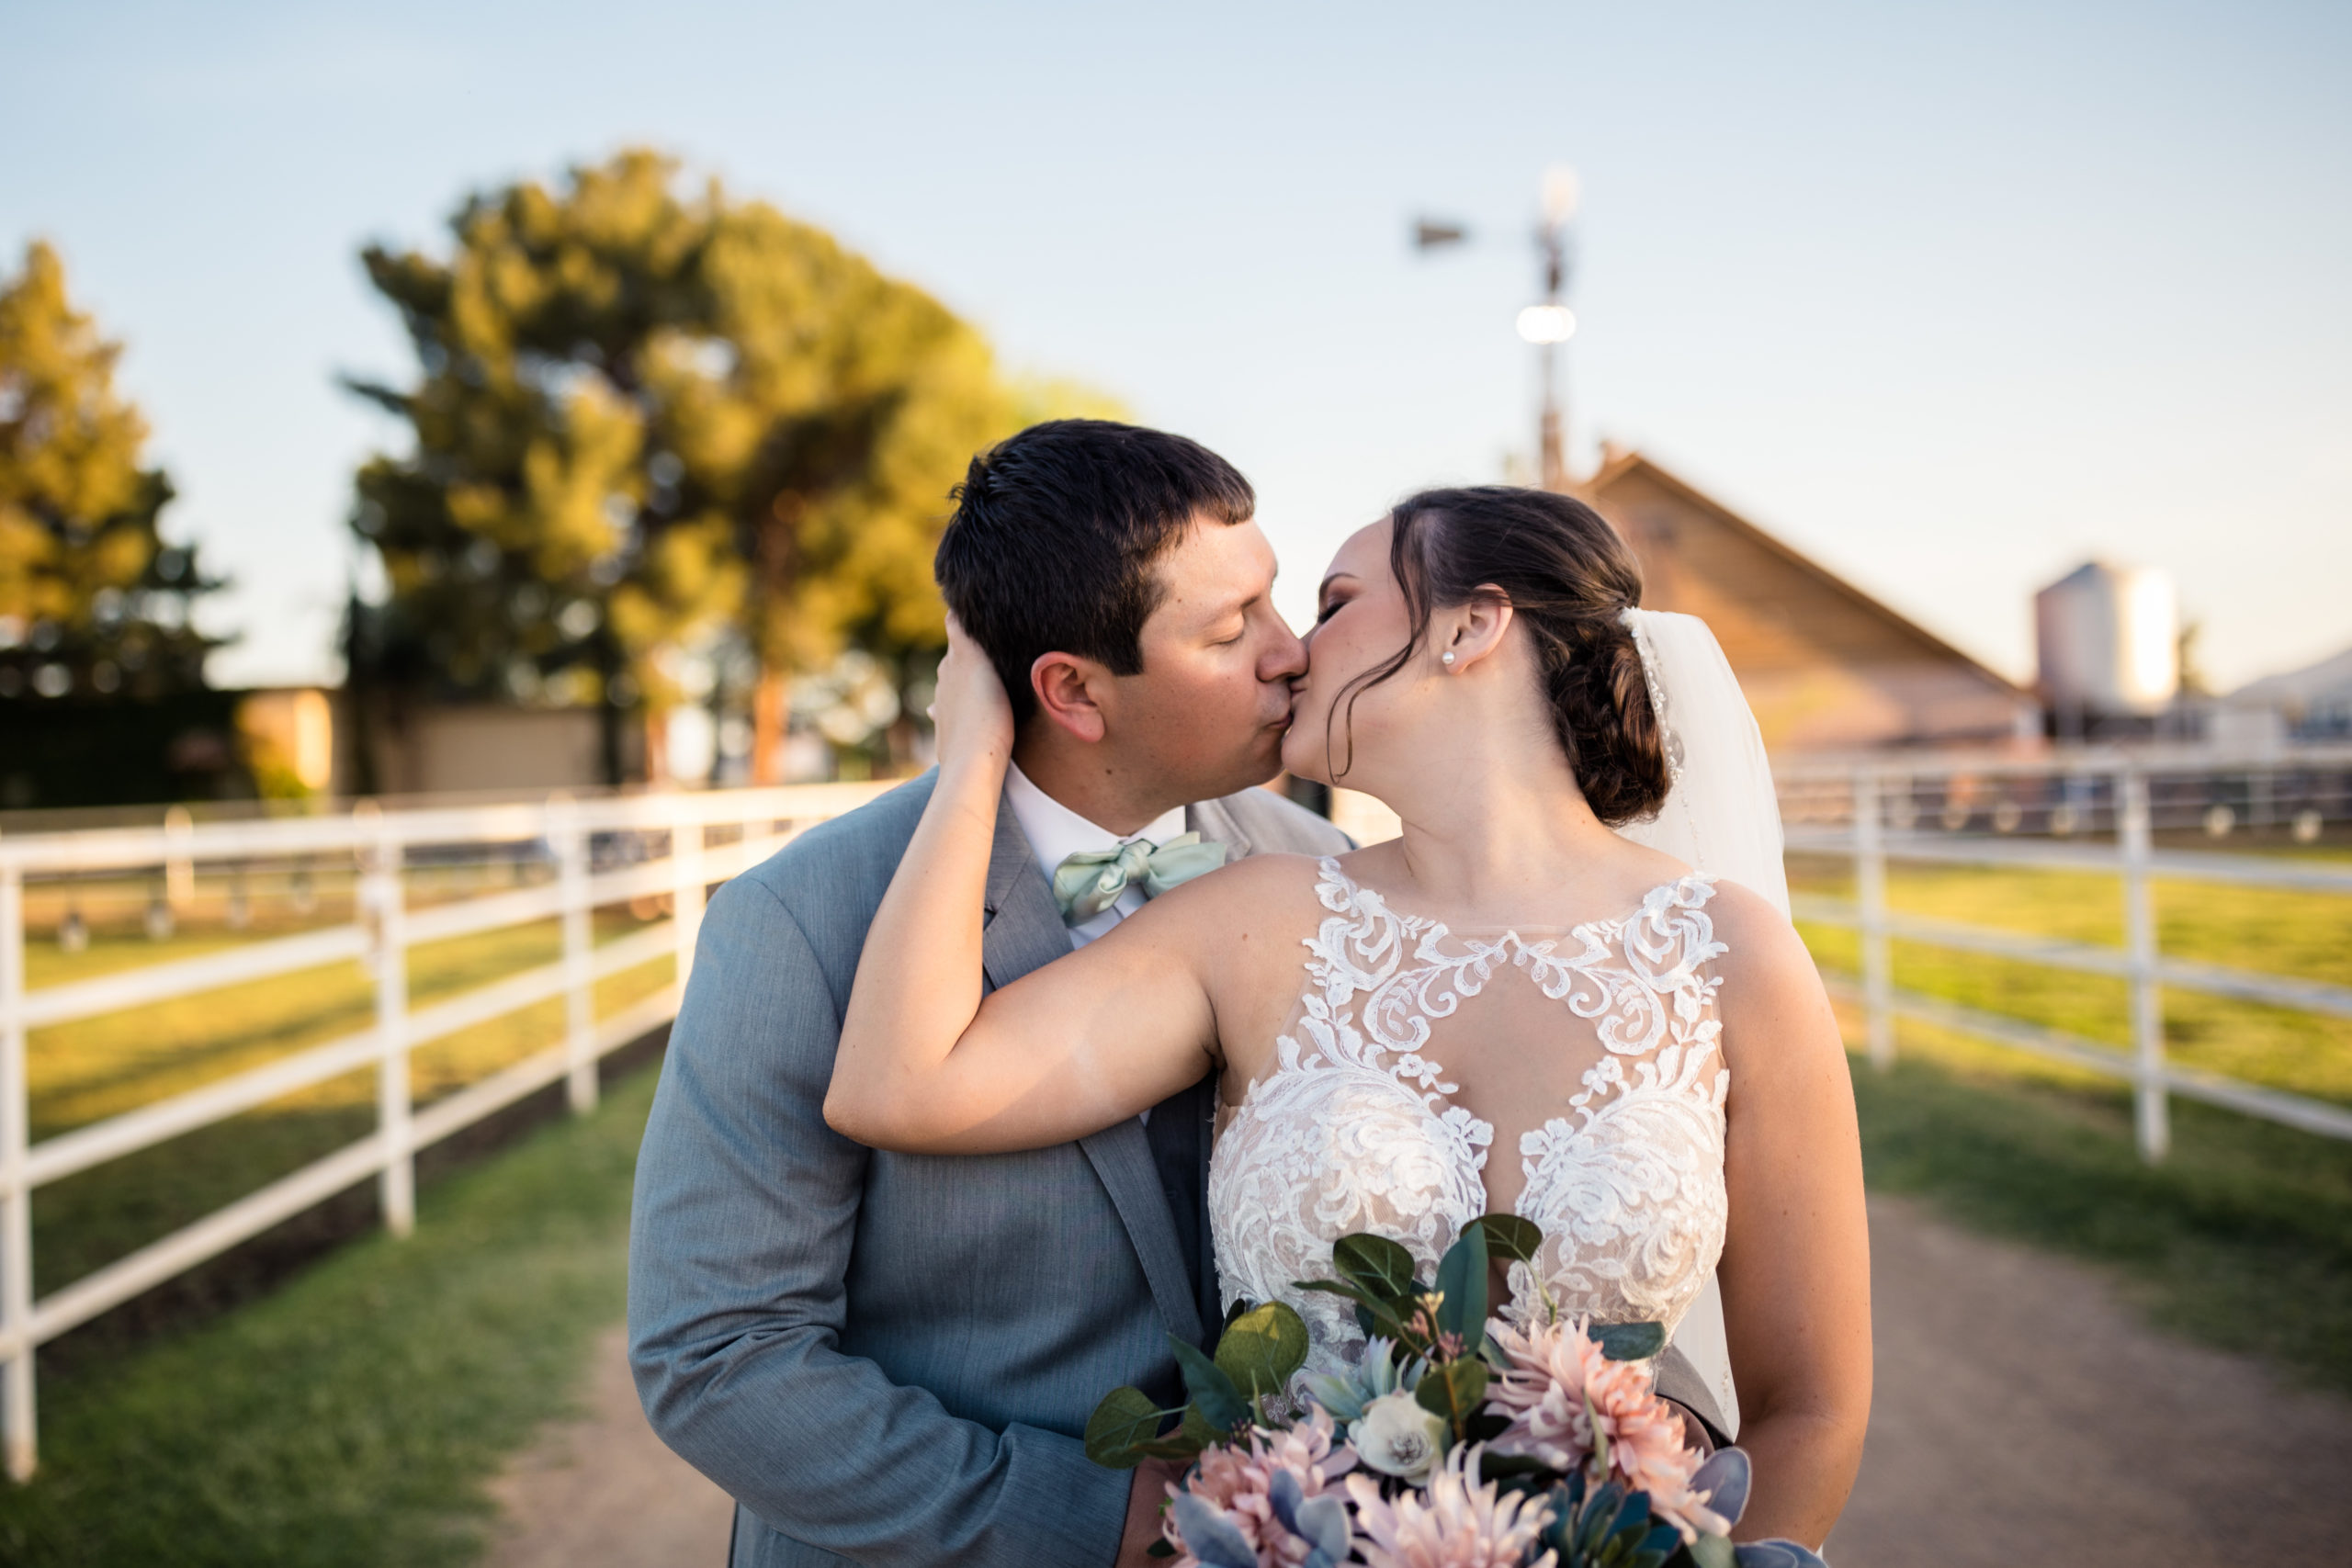 Bride places her hands on the back of the groom’s face as they share a kiss in front of the ranch and horse pens at The Knotty Barn, shot by Makayla MacGarvey